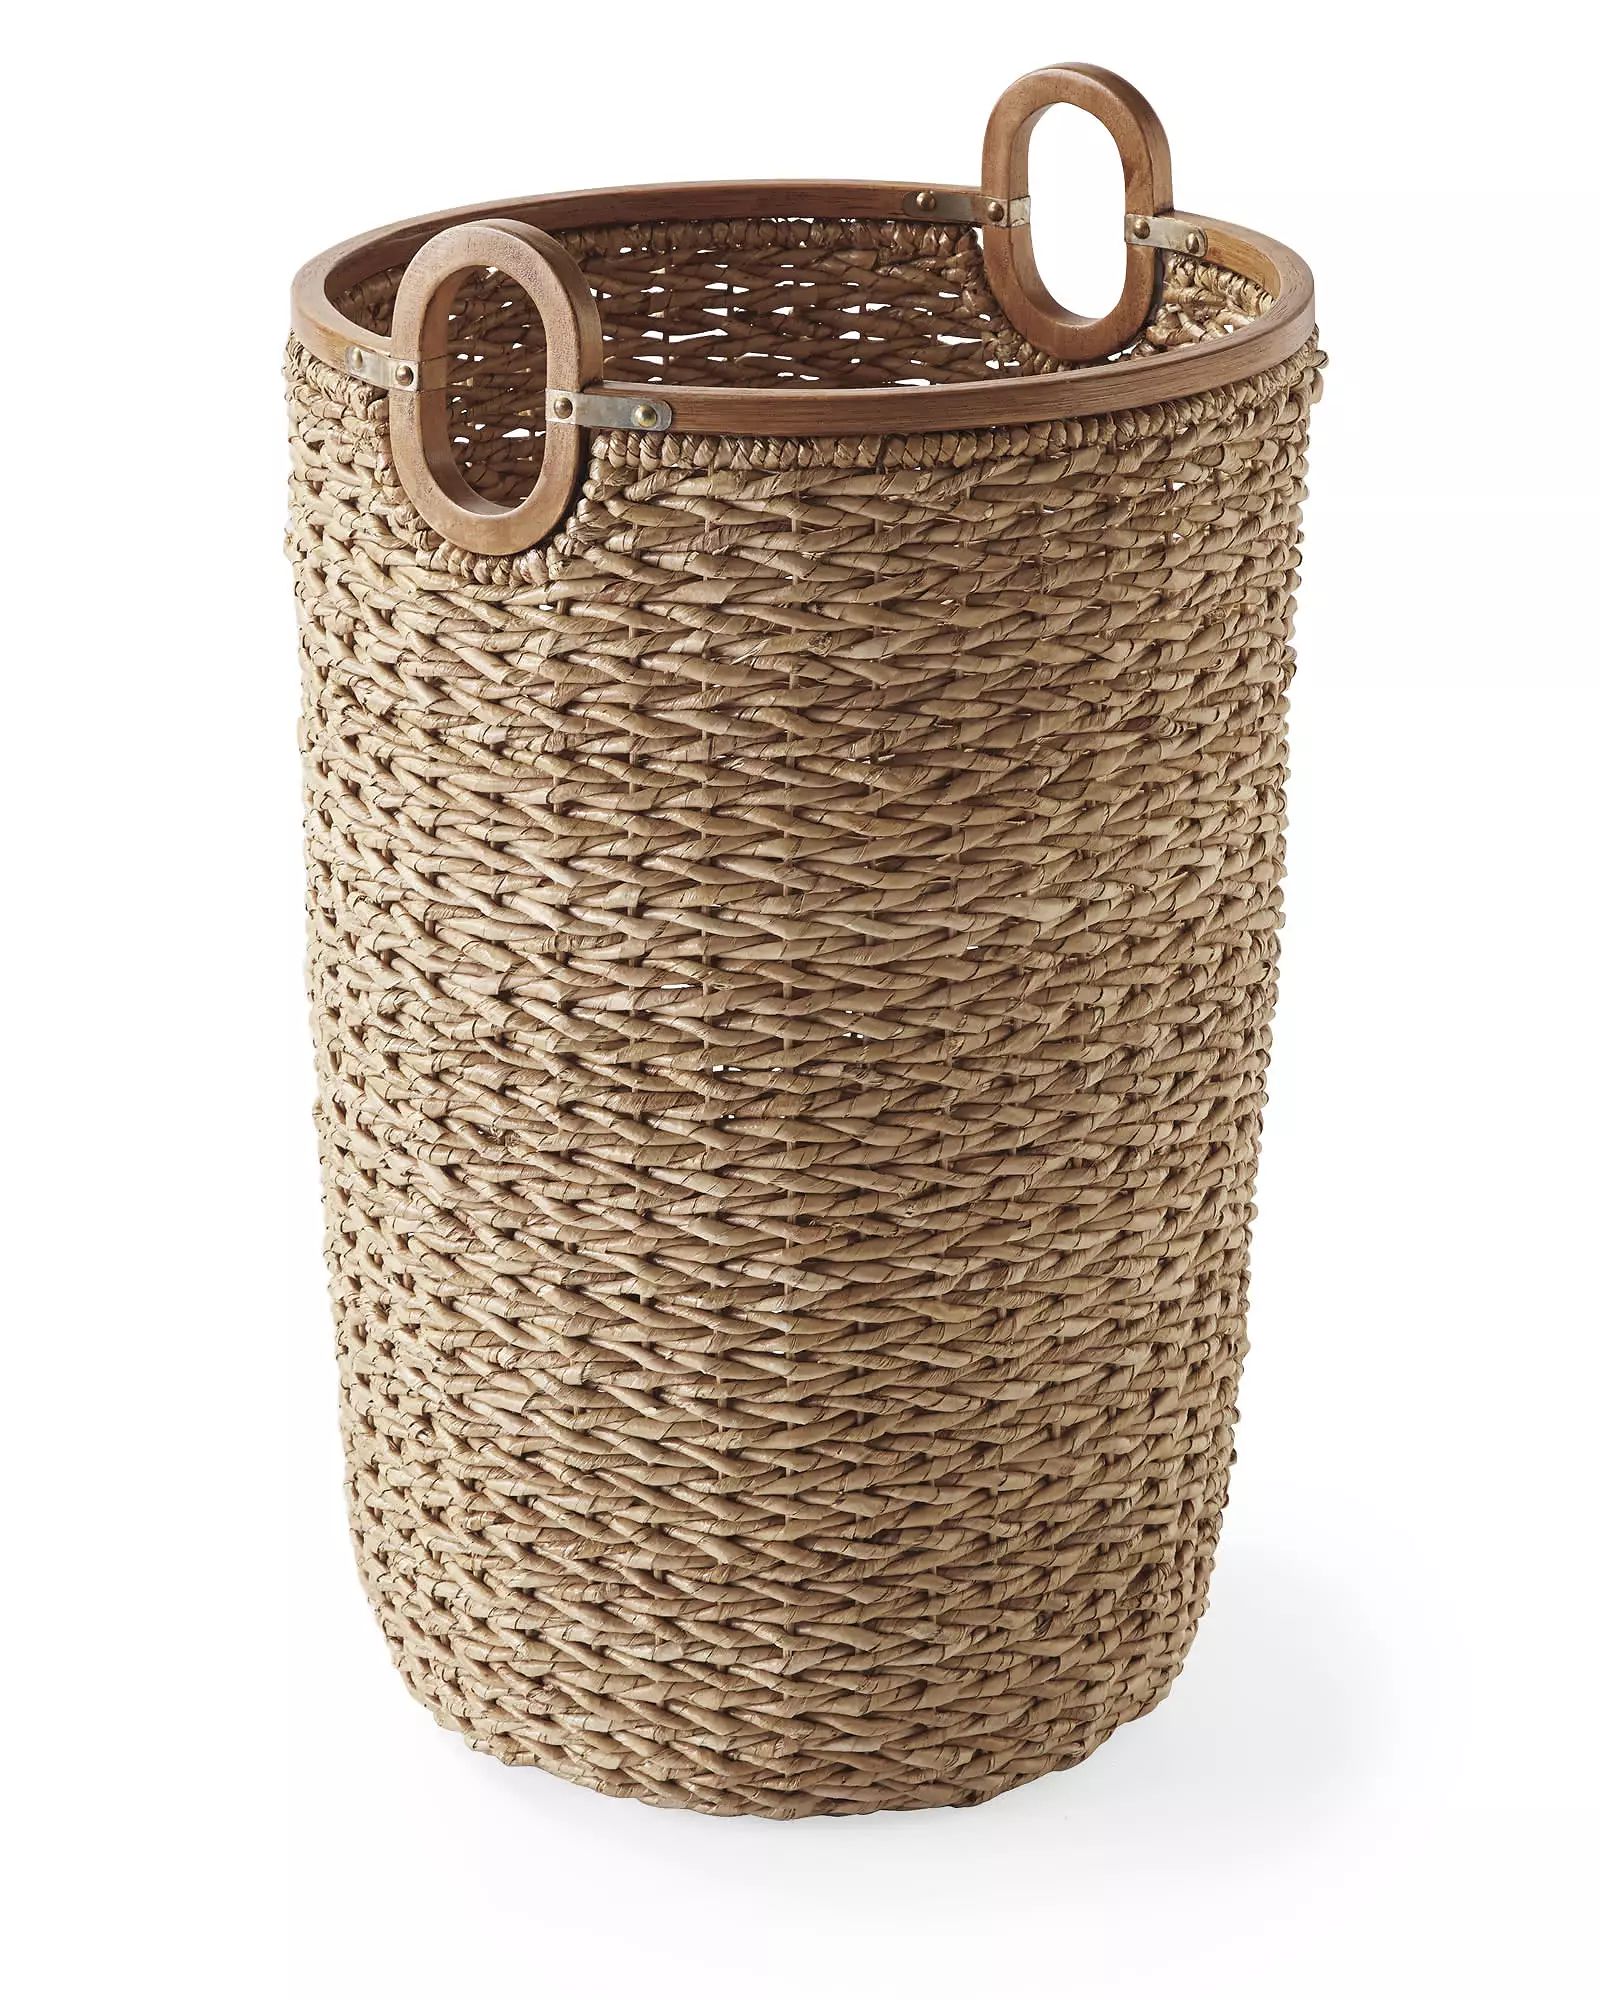 Seagrass Basket | Serena and Lily